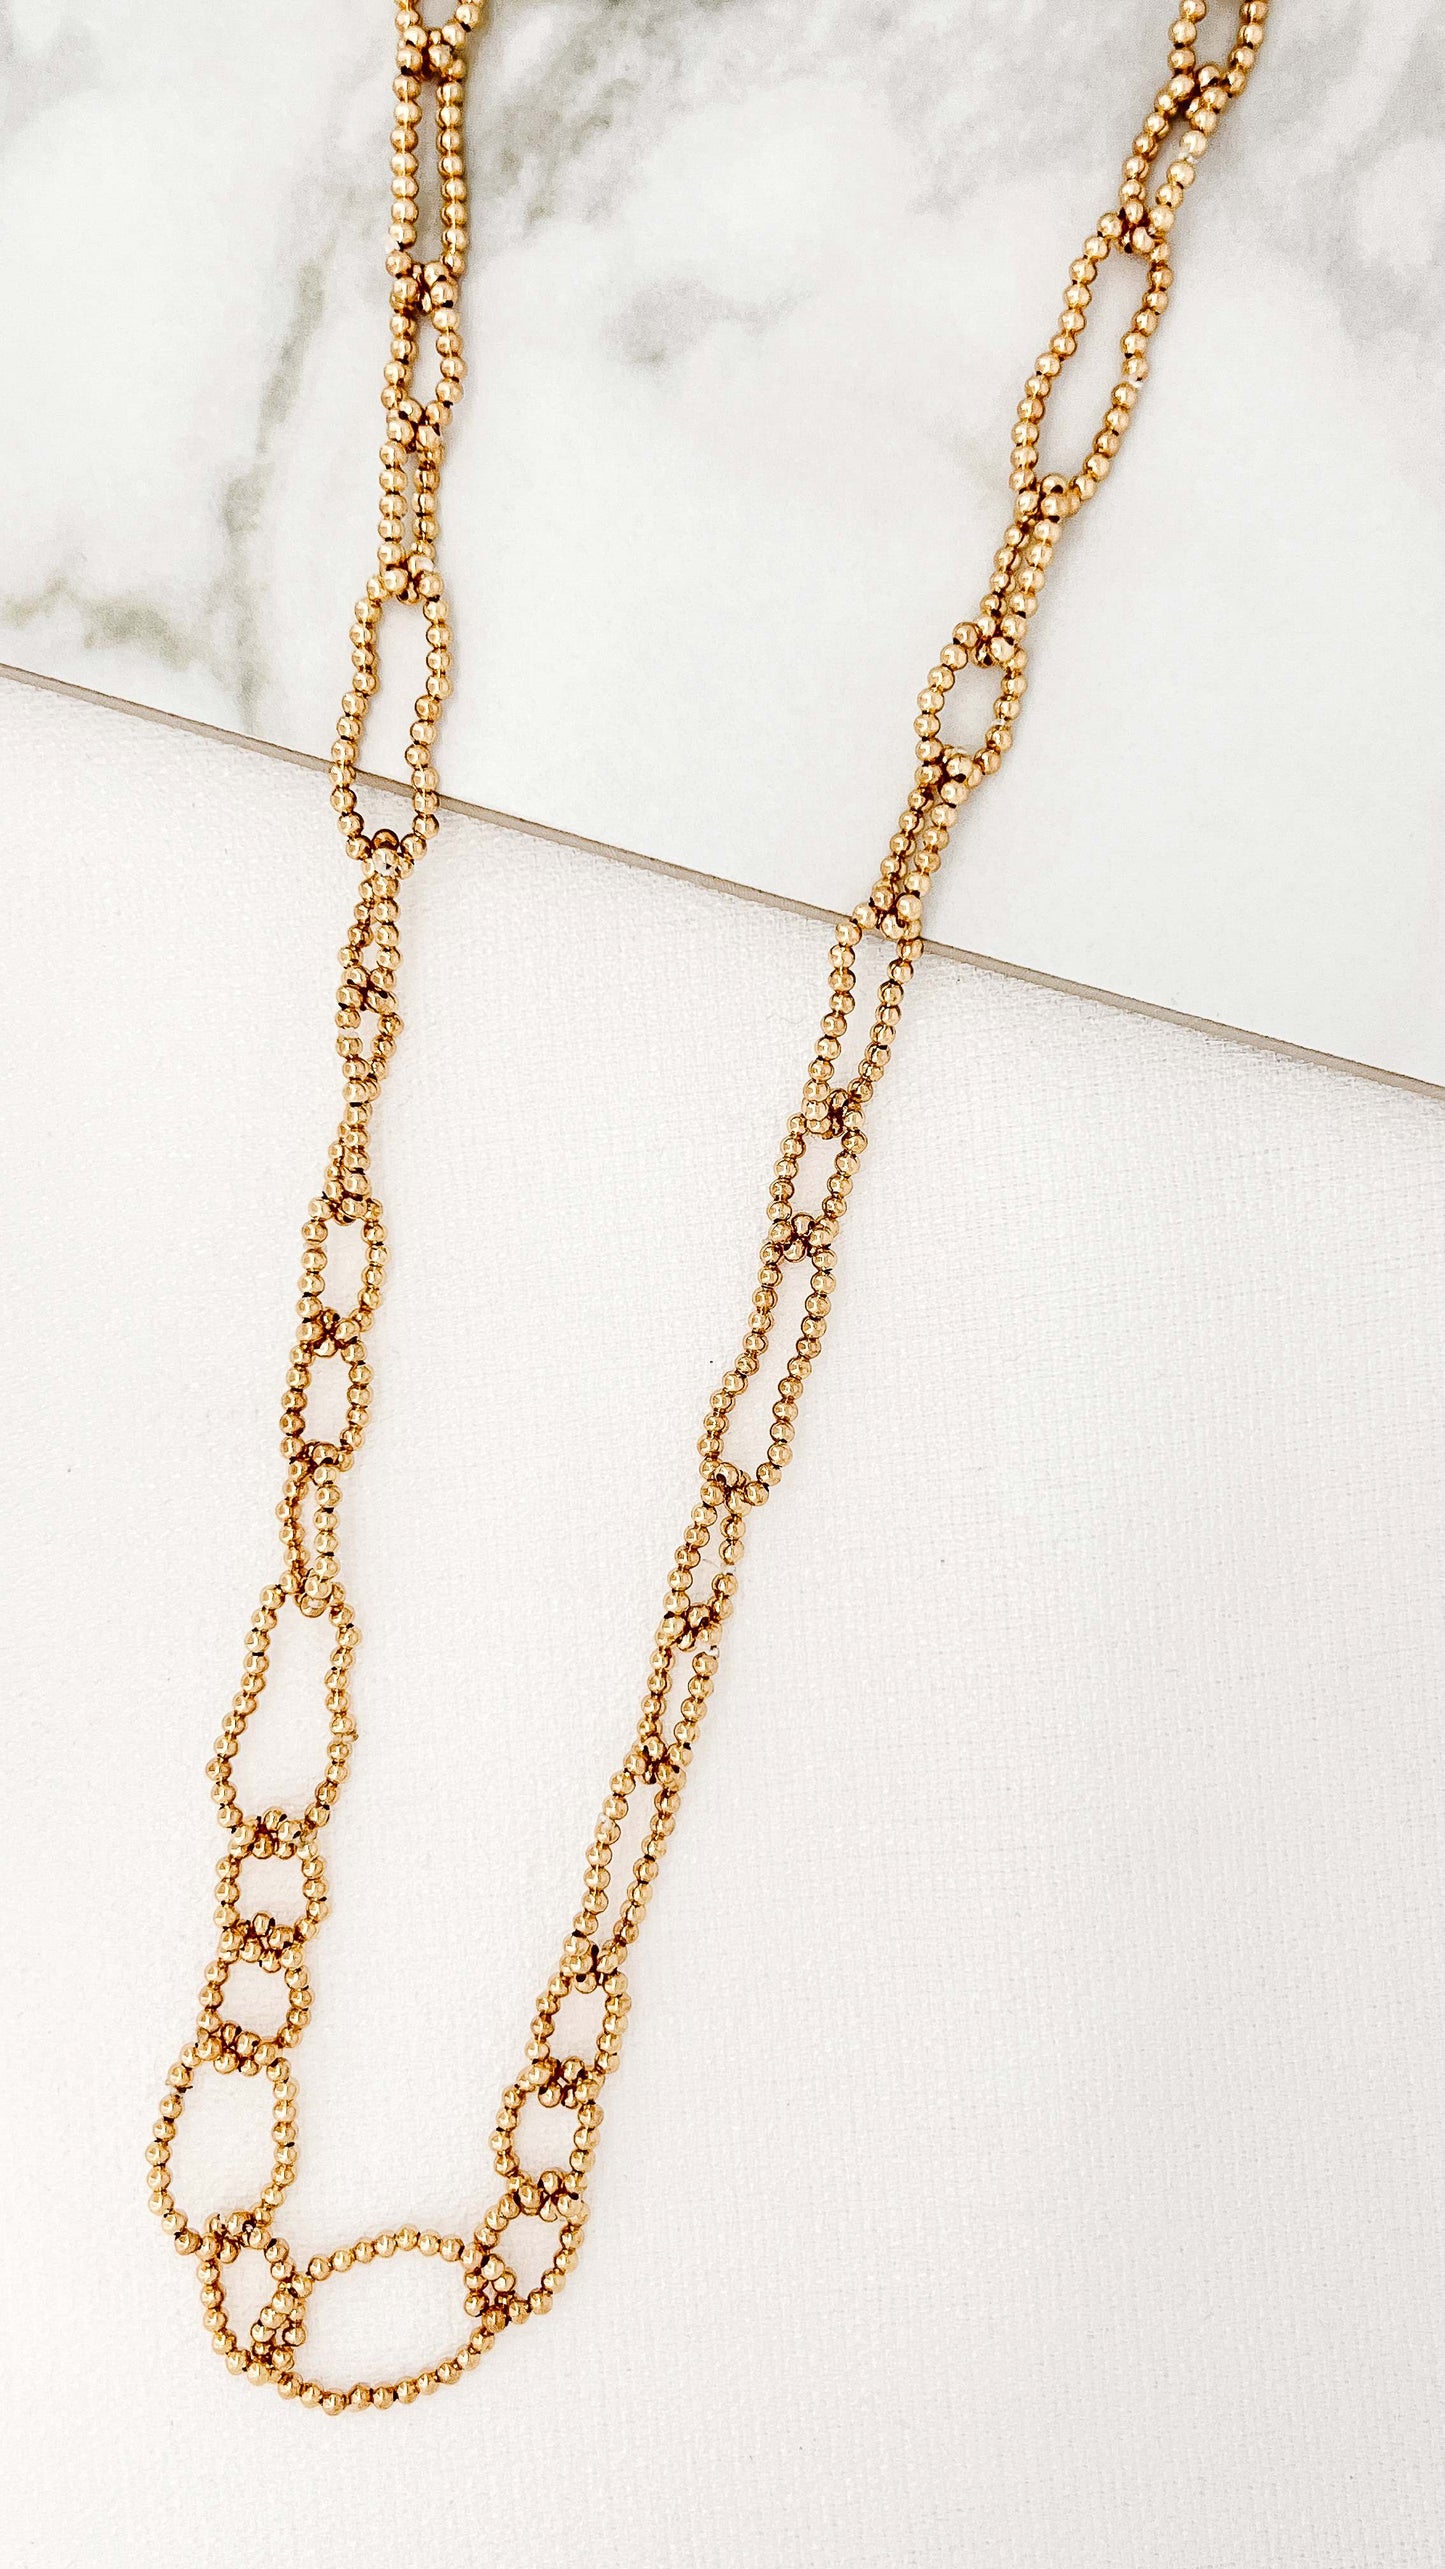 Long Beaded Chain Necklace in Gold